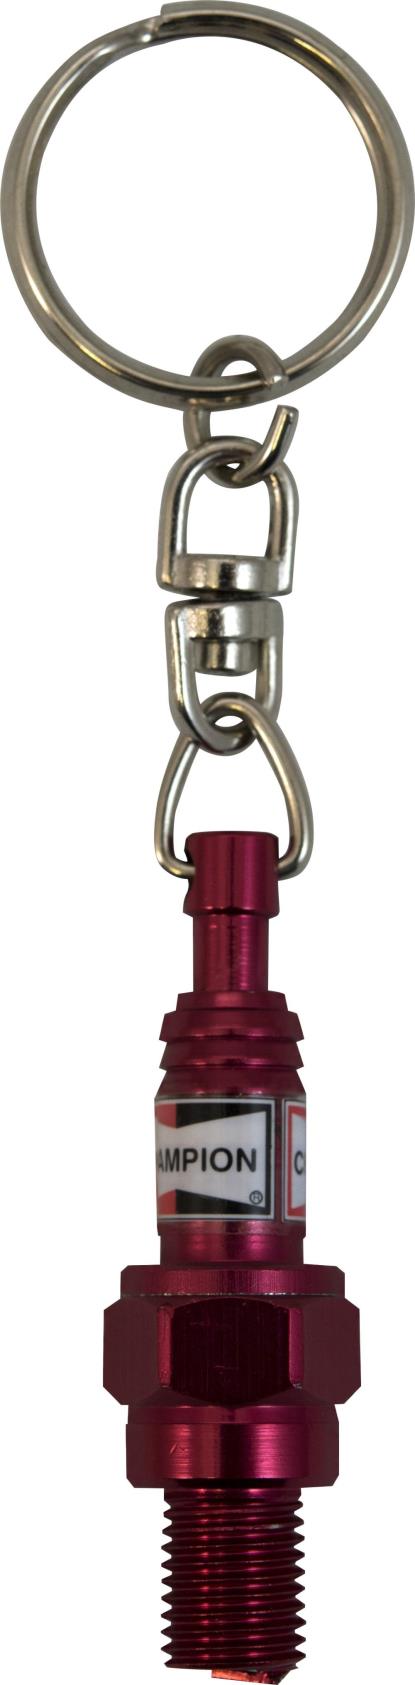 Picture of Key Ring Spark Plug with Light Red